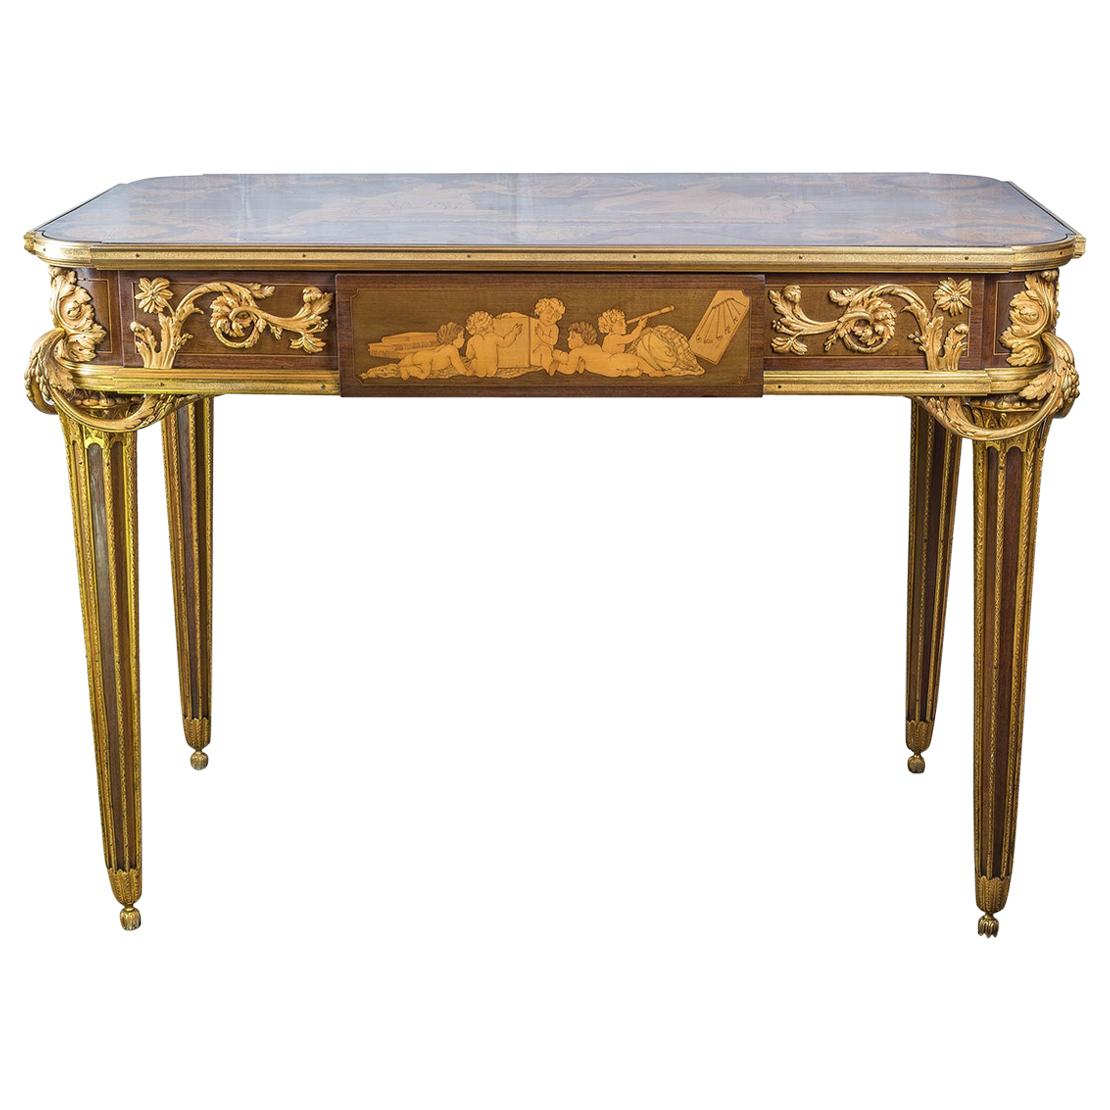 19th Century French Ormolu Mounted Marquetry Center Table by E. Khan & Cie. For Sale